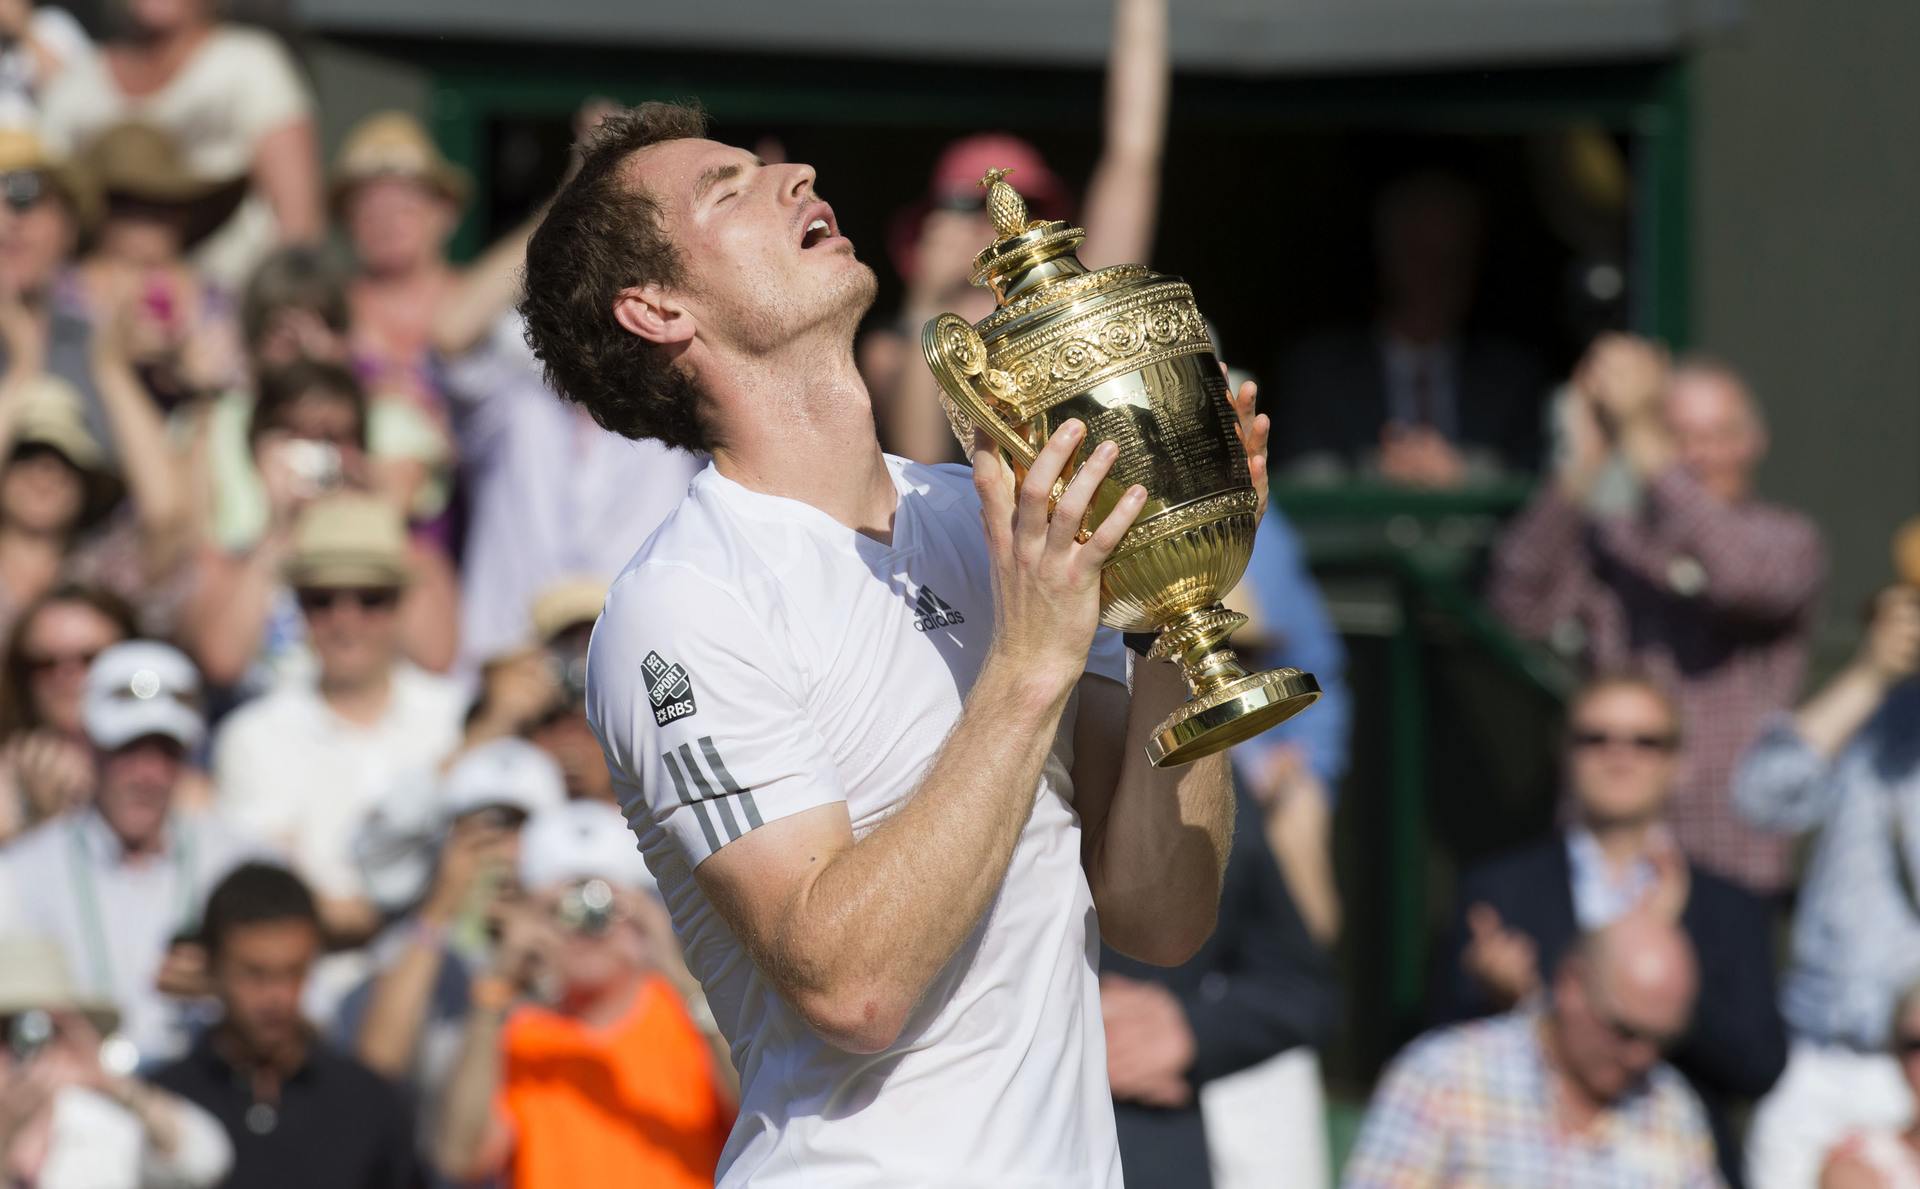 Sheer delight after clinching a straight sets victory over Novak Djokovic to win his first Wimbledon title ten years ago.